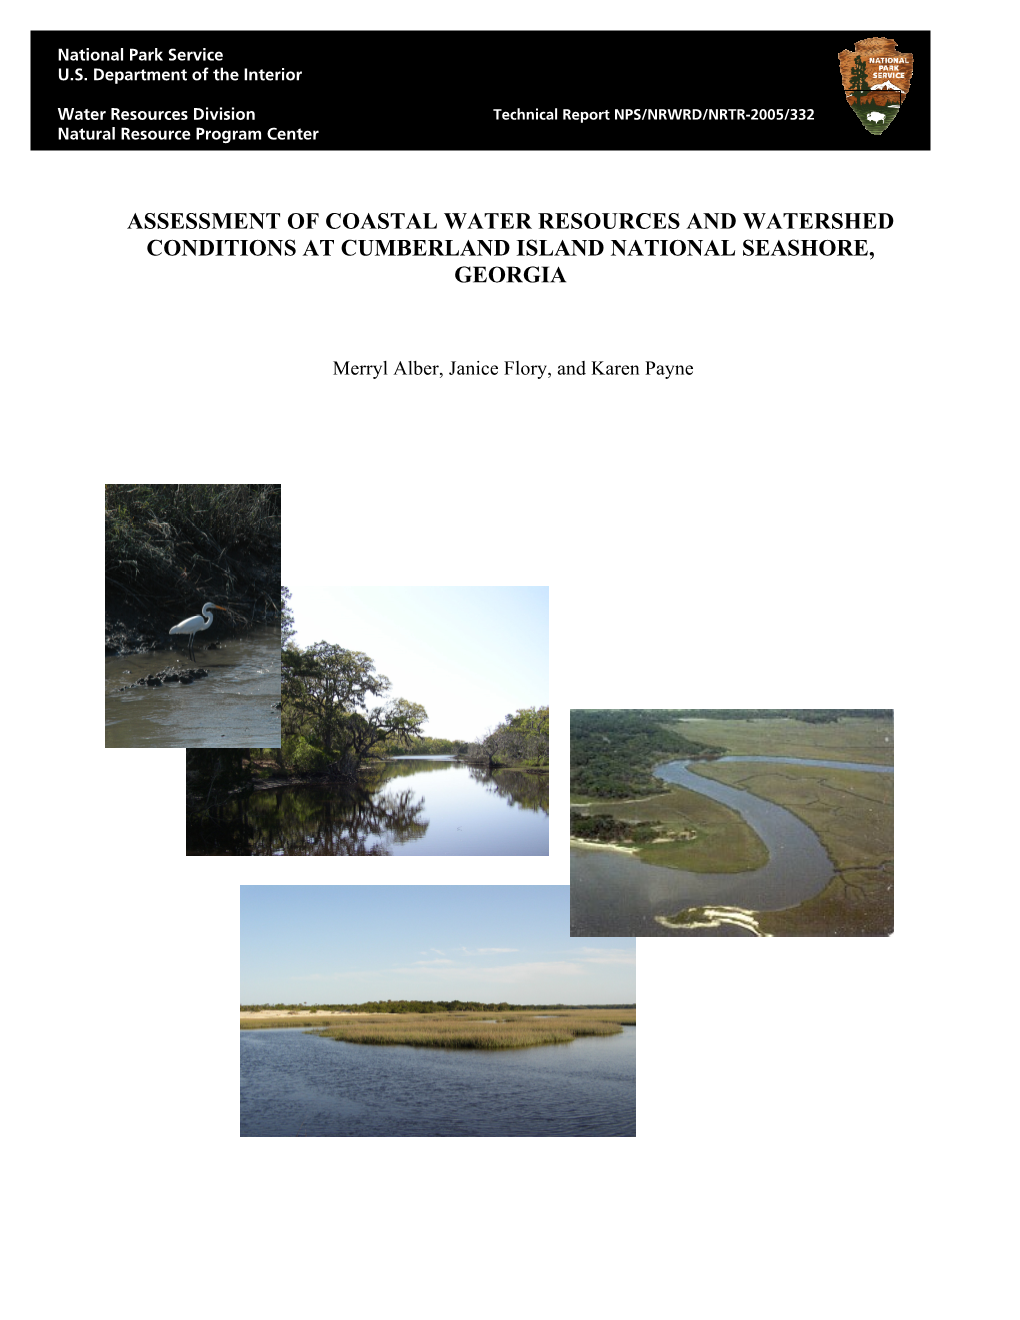 Assessment of Coastal Water Resources and Watershed Conditions at Cumberland Island National Seashore, Georgia